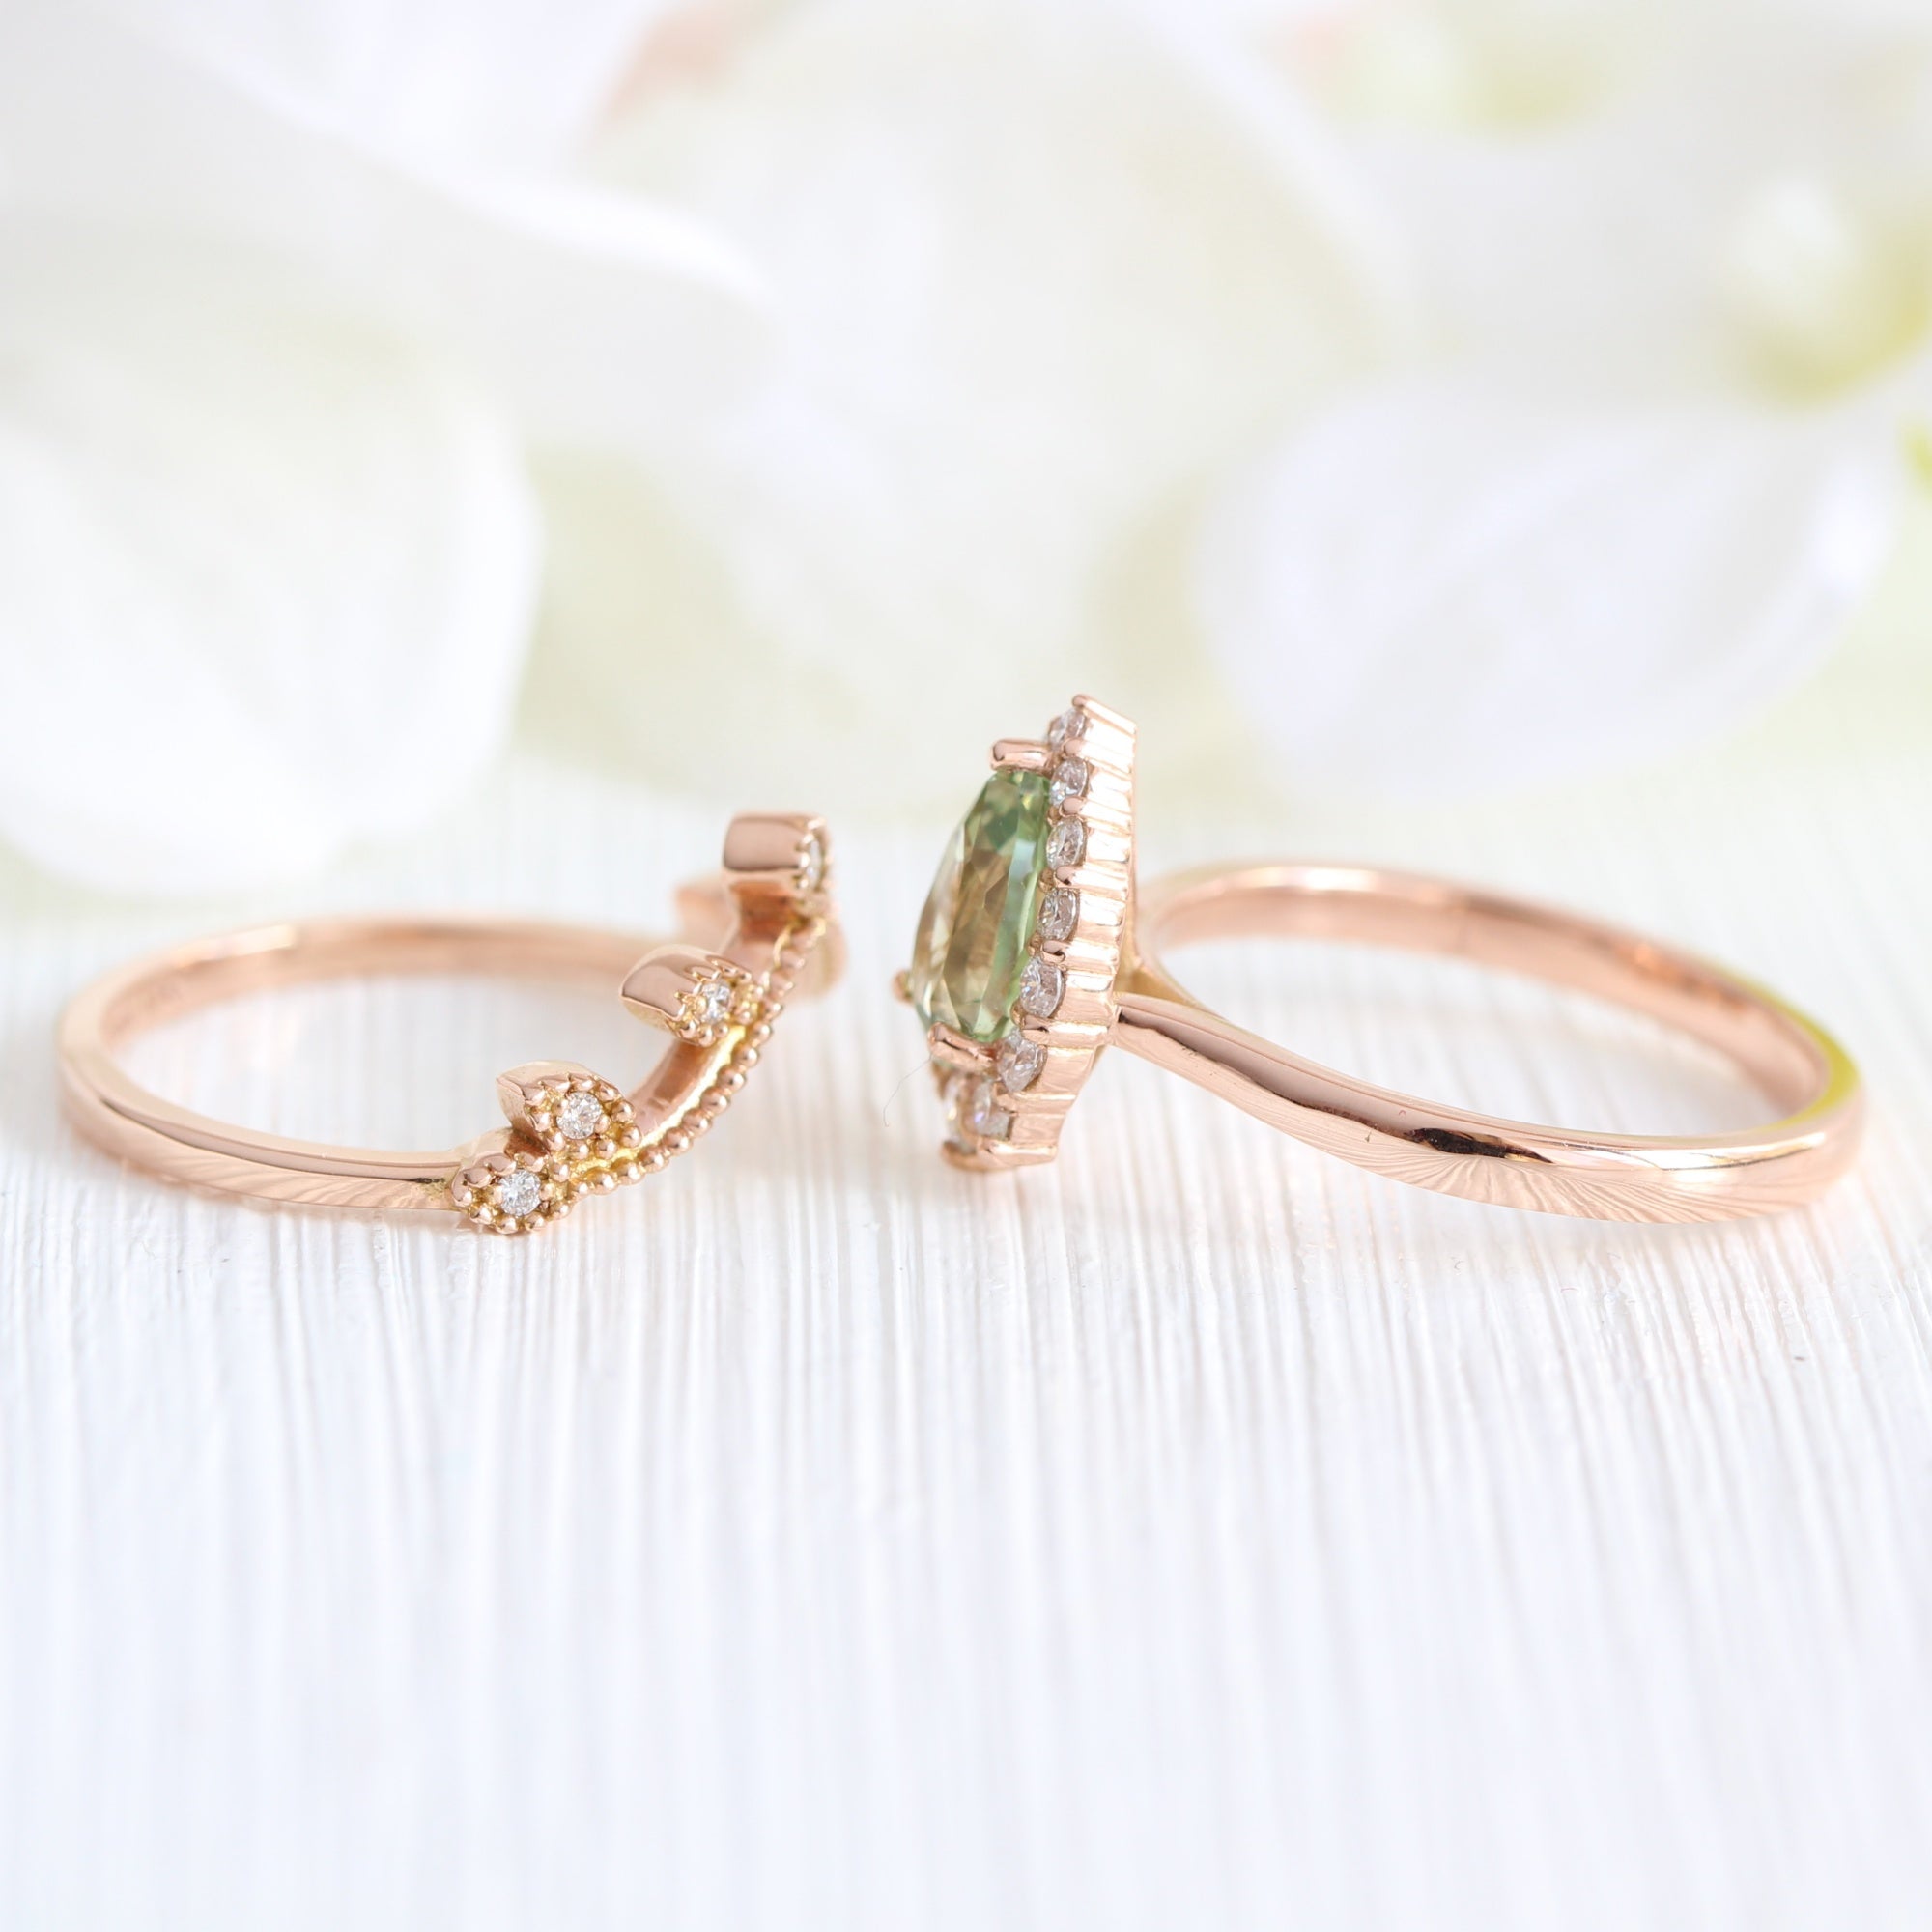 Pear green sapphire ring rose gold curved leaf diamond wedding band la more design jewelry